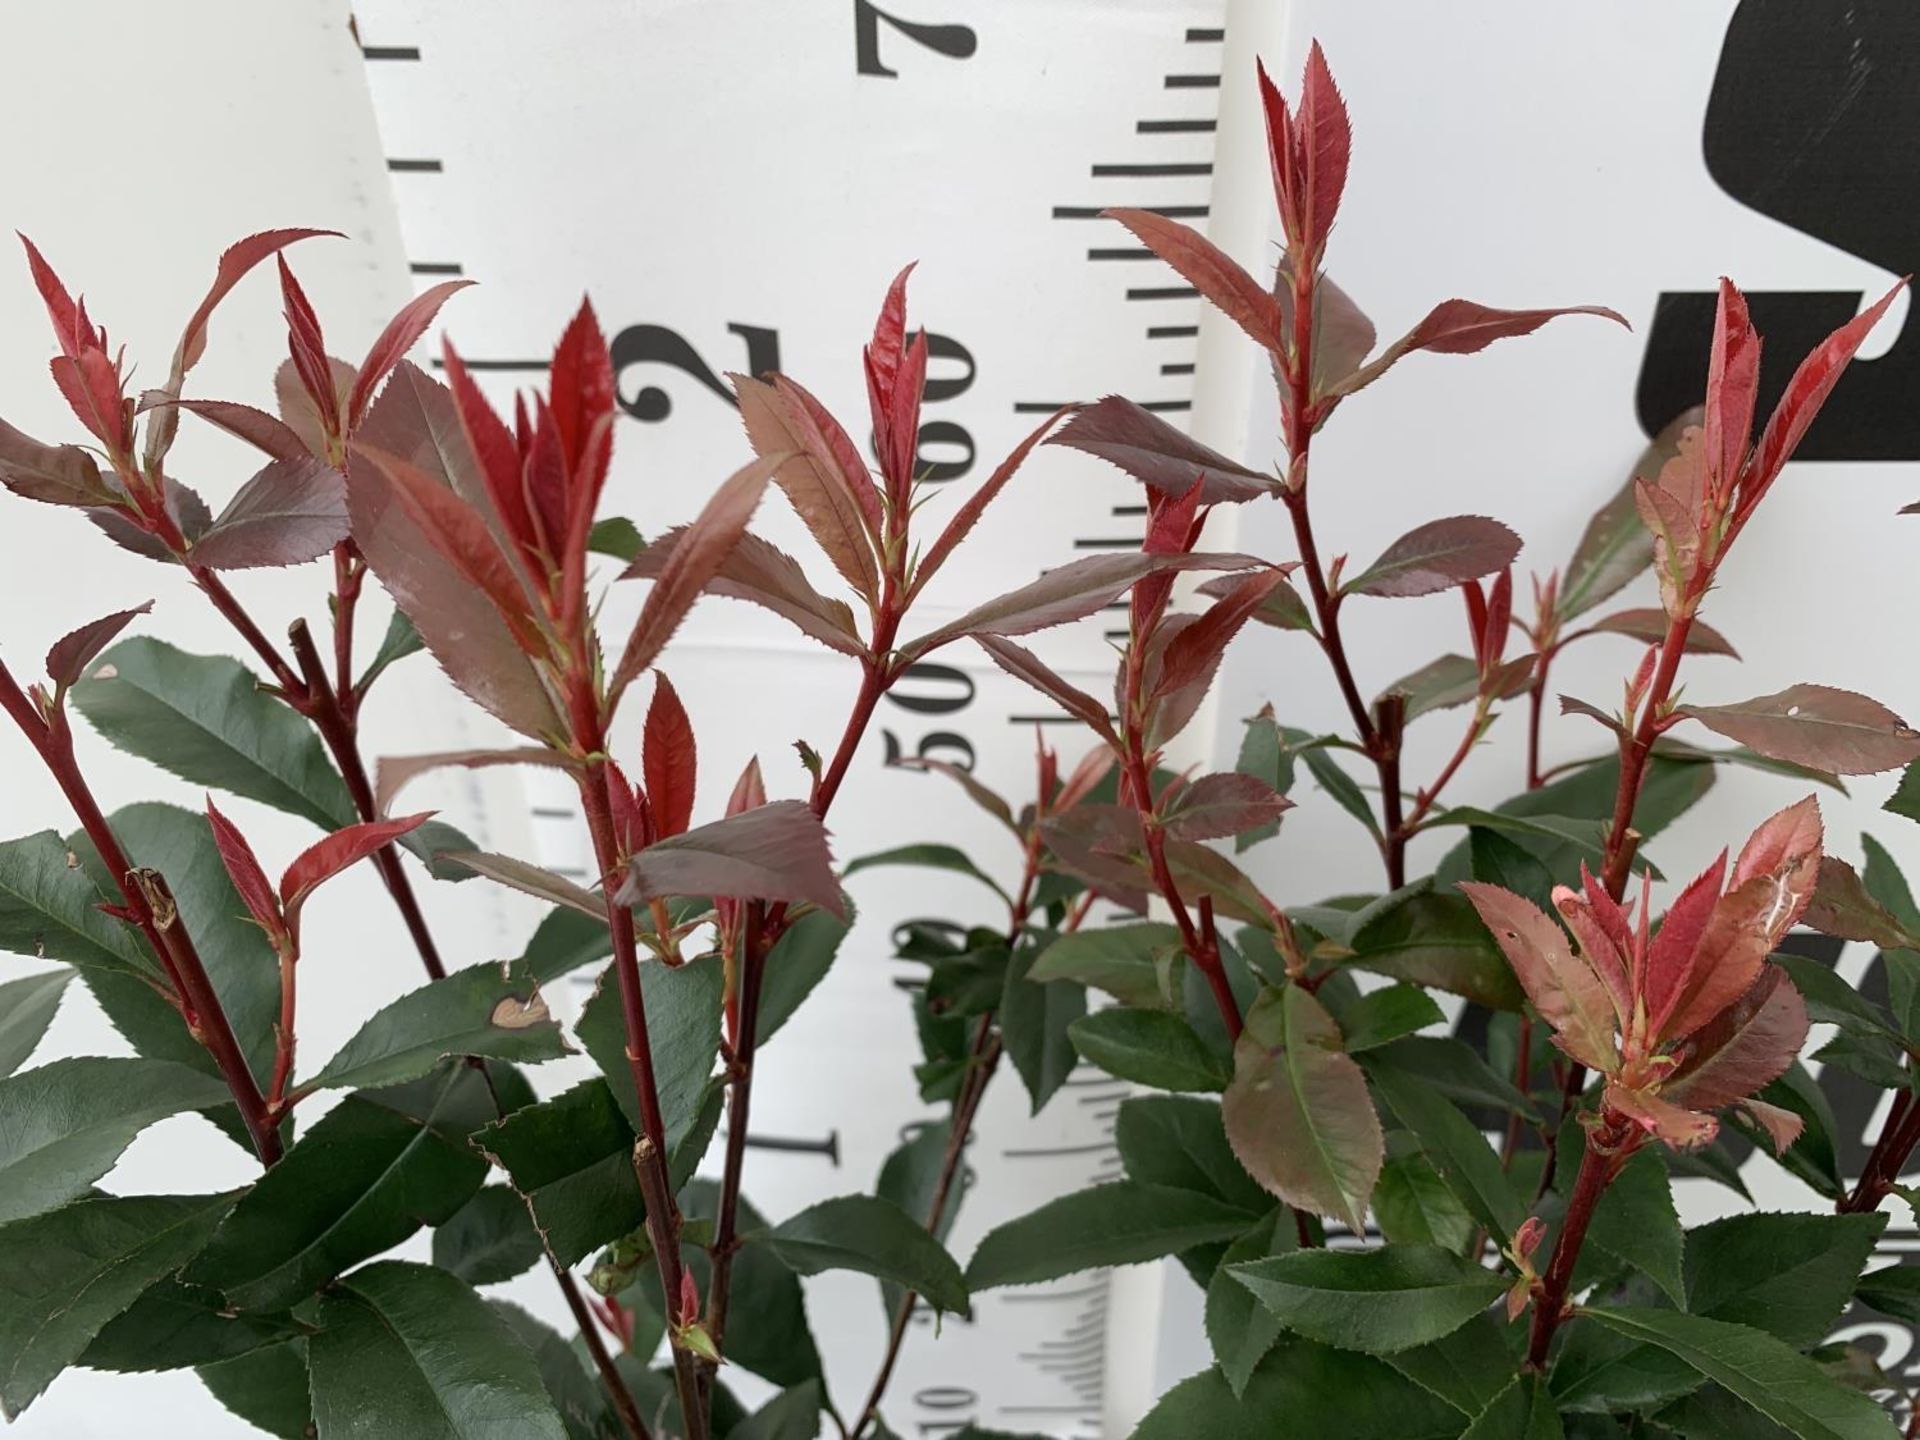 TWO PHOTINIA FRASERI 'CARRE ROUGE' PLANTS IN 3 LTR POTS APPROX 60CM IN HEIGHT PLUS VAT TO BE SOLD - Image 3 of 5